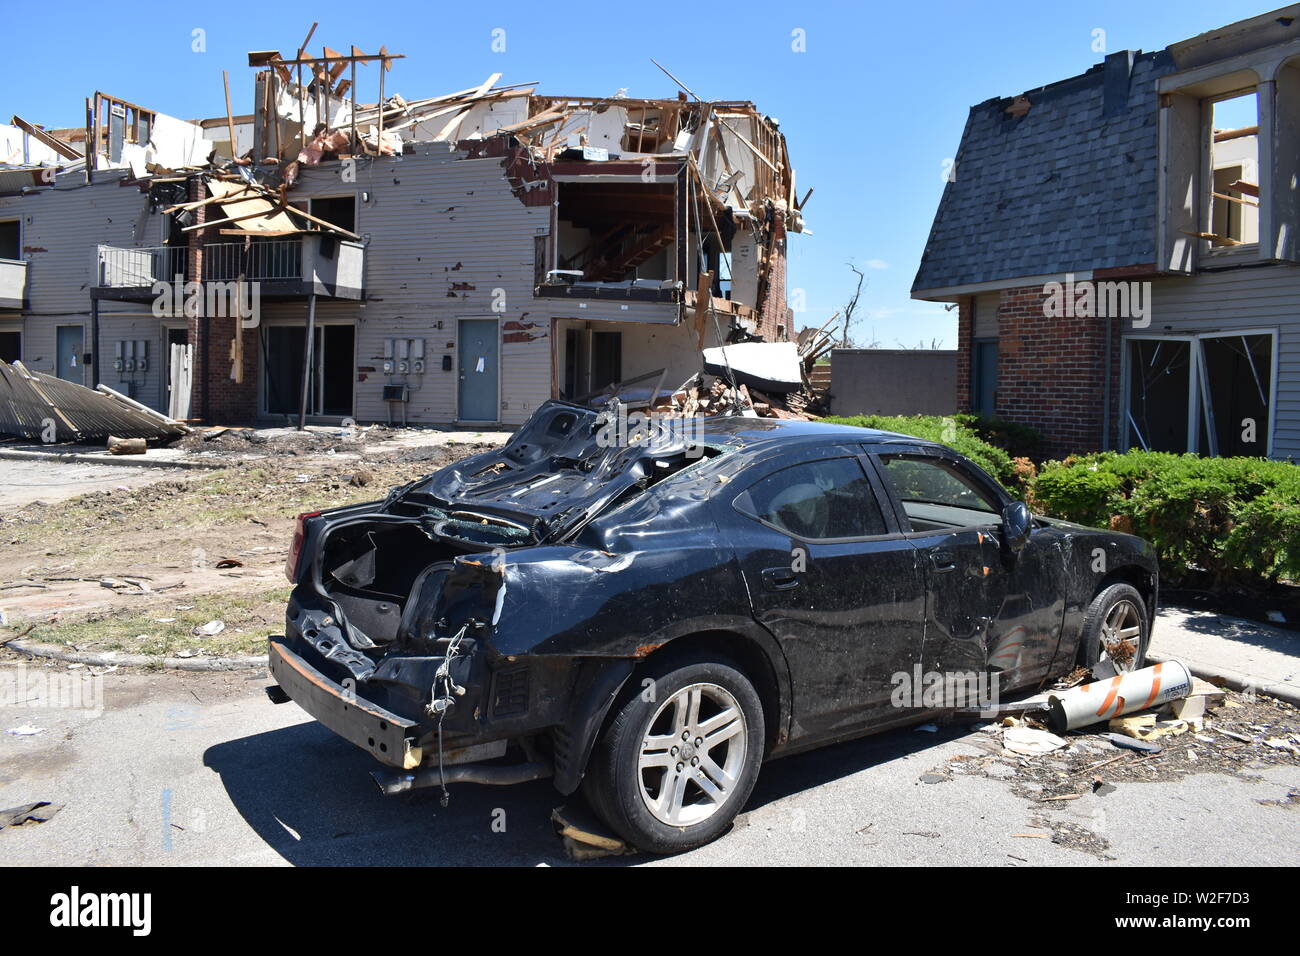 Tornado damaged that occurred on May 27, 2019 in the Dayton, Ohio vicinity Stock Photo